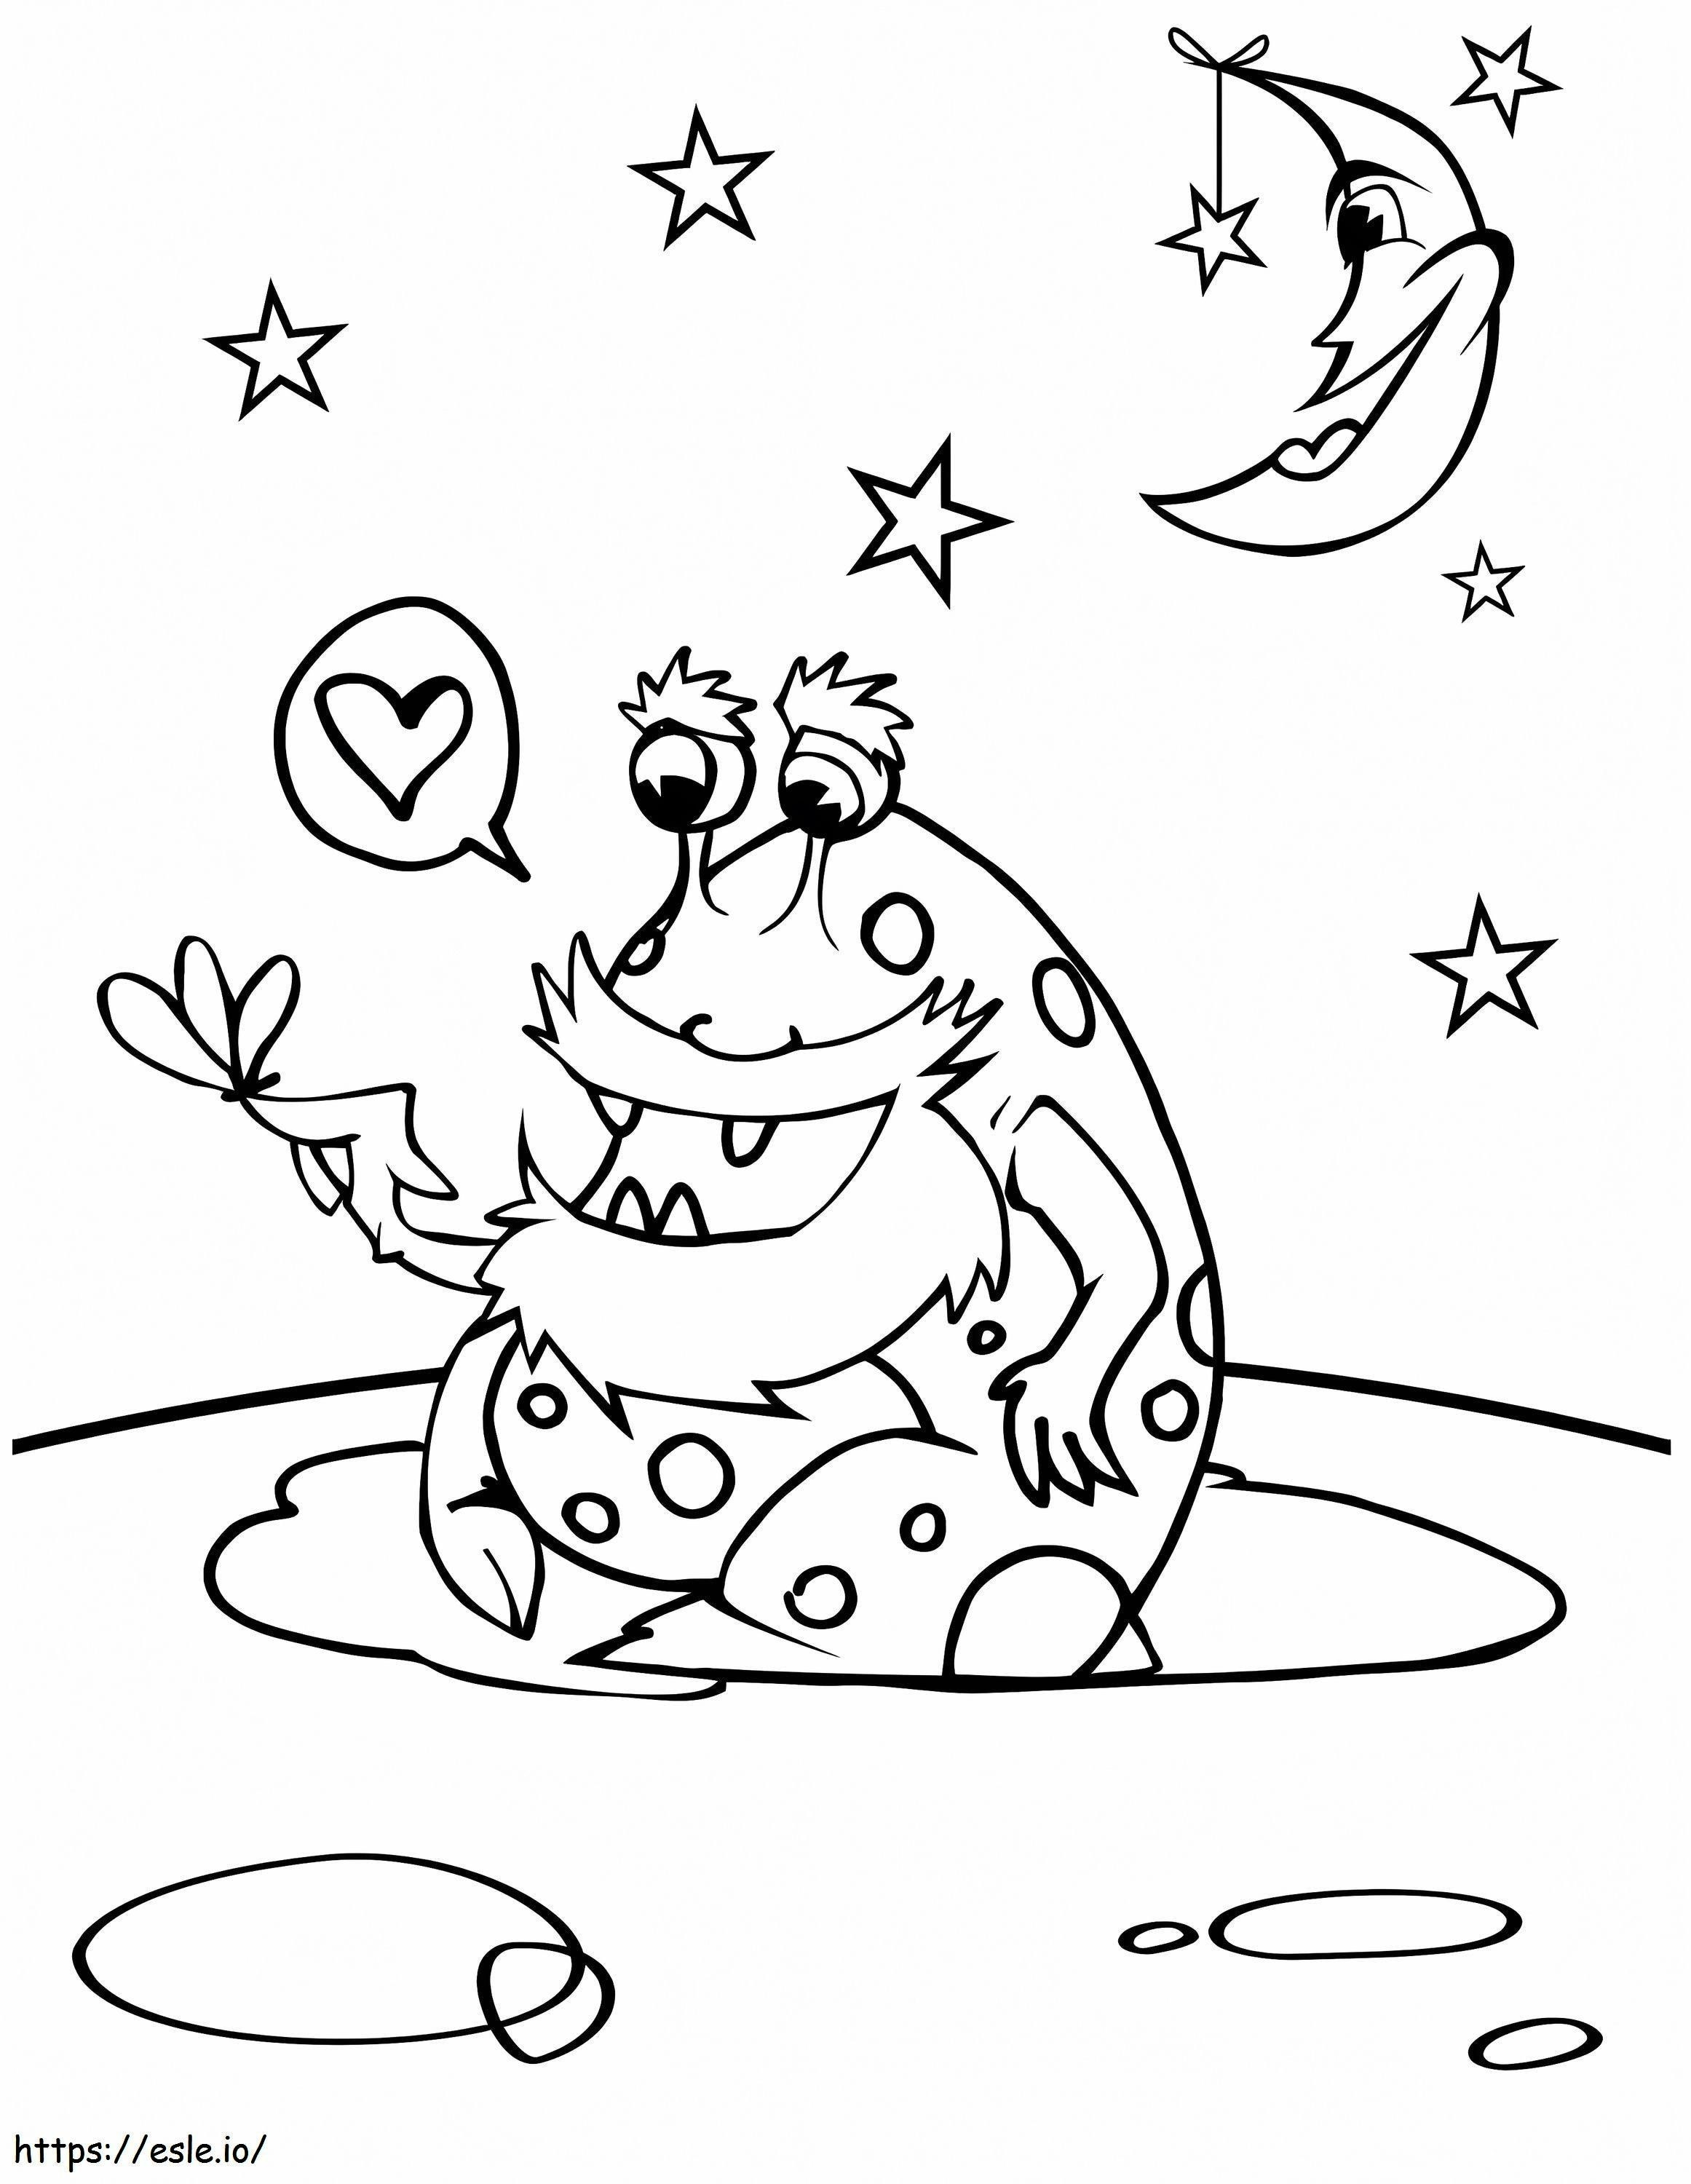 Funny Alien Outer Space coloring page